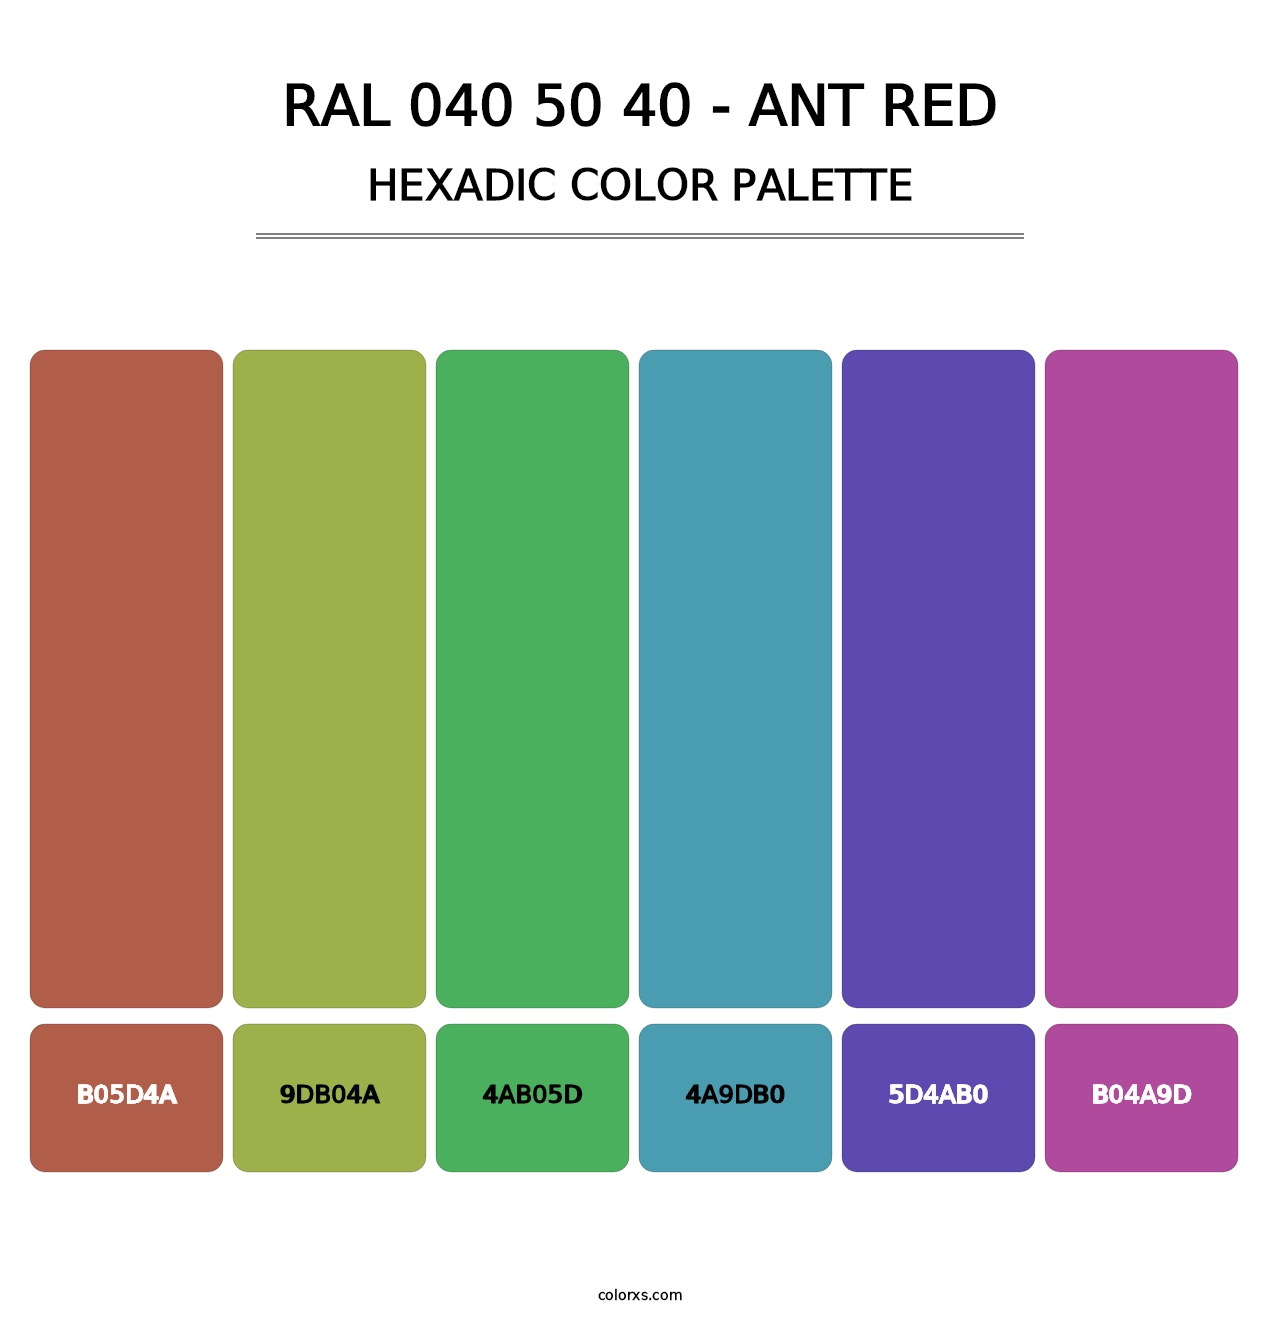 RAL 040 50 40 - Ant Red - Hexadic Color Palette